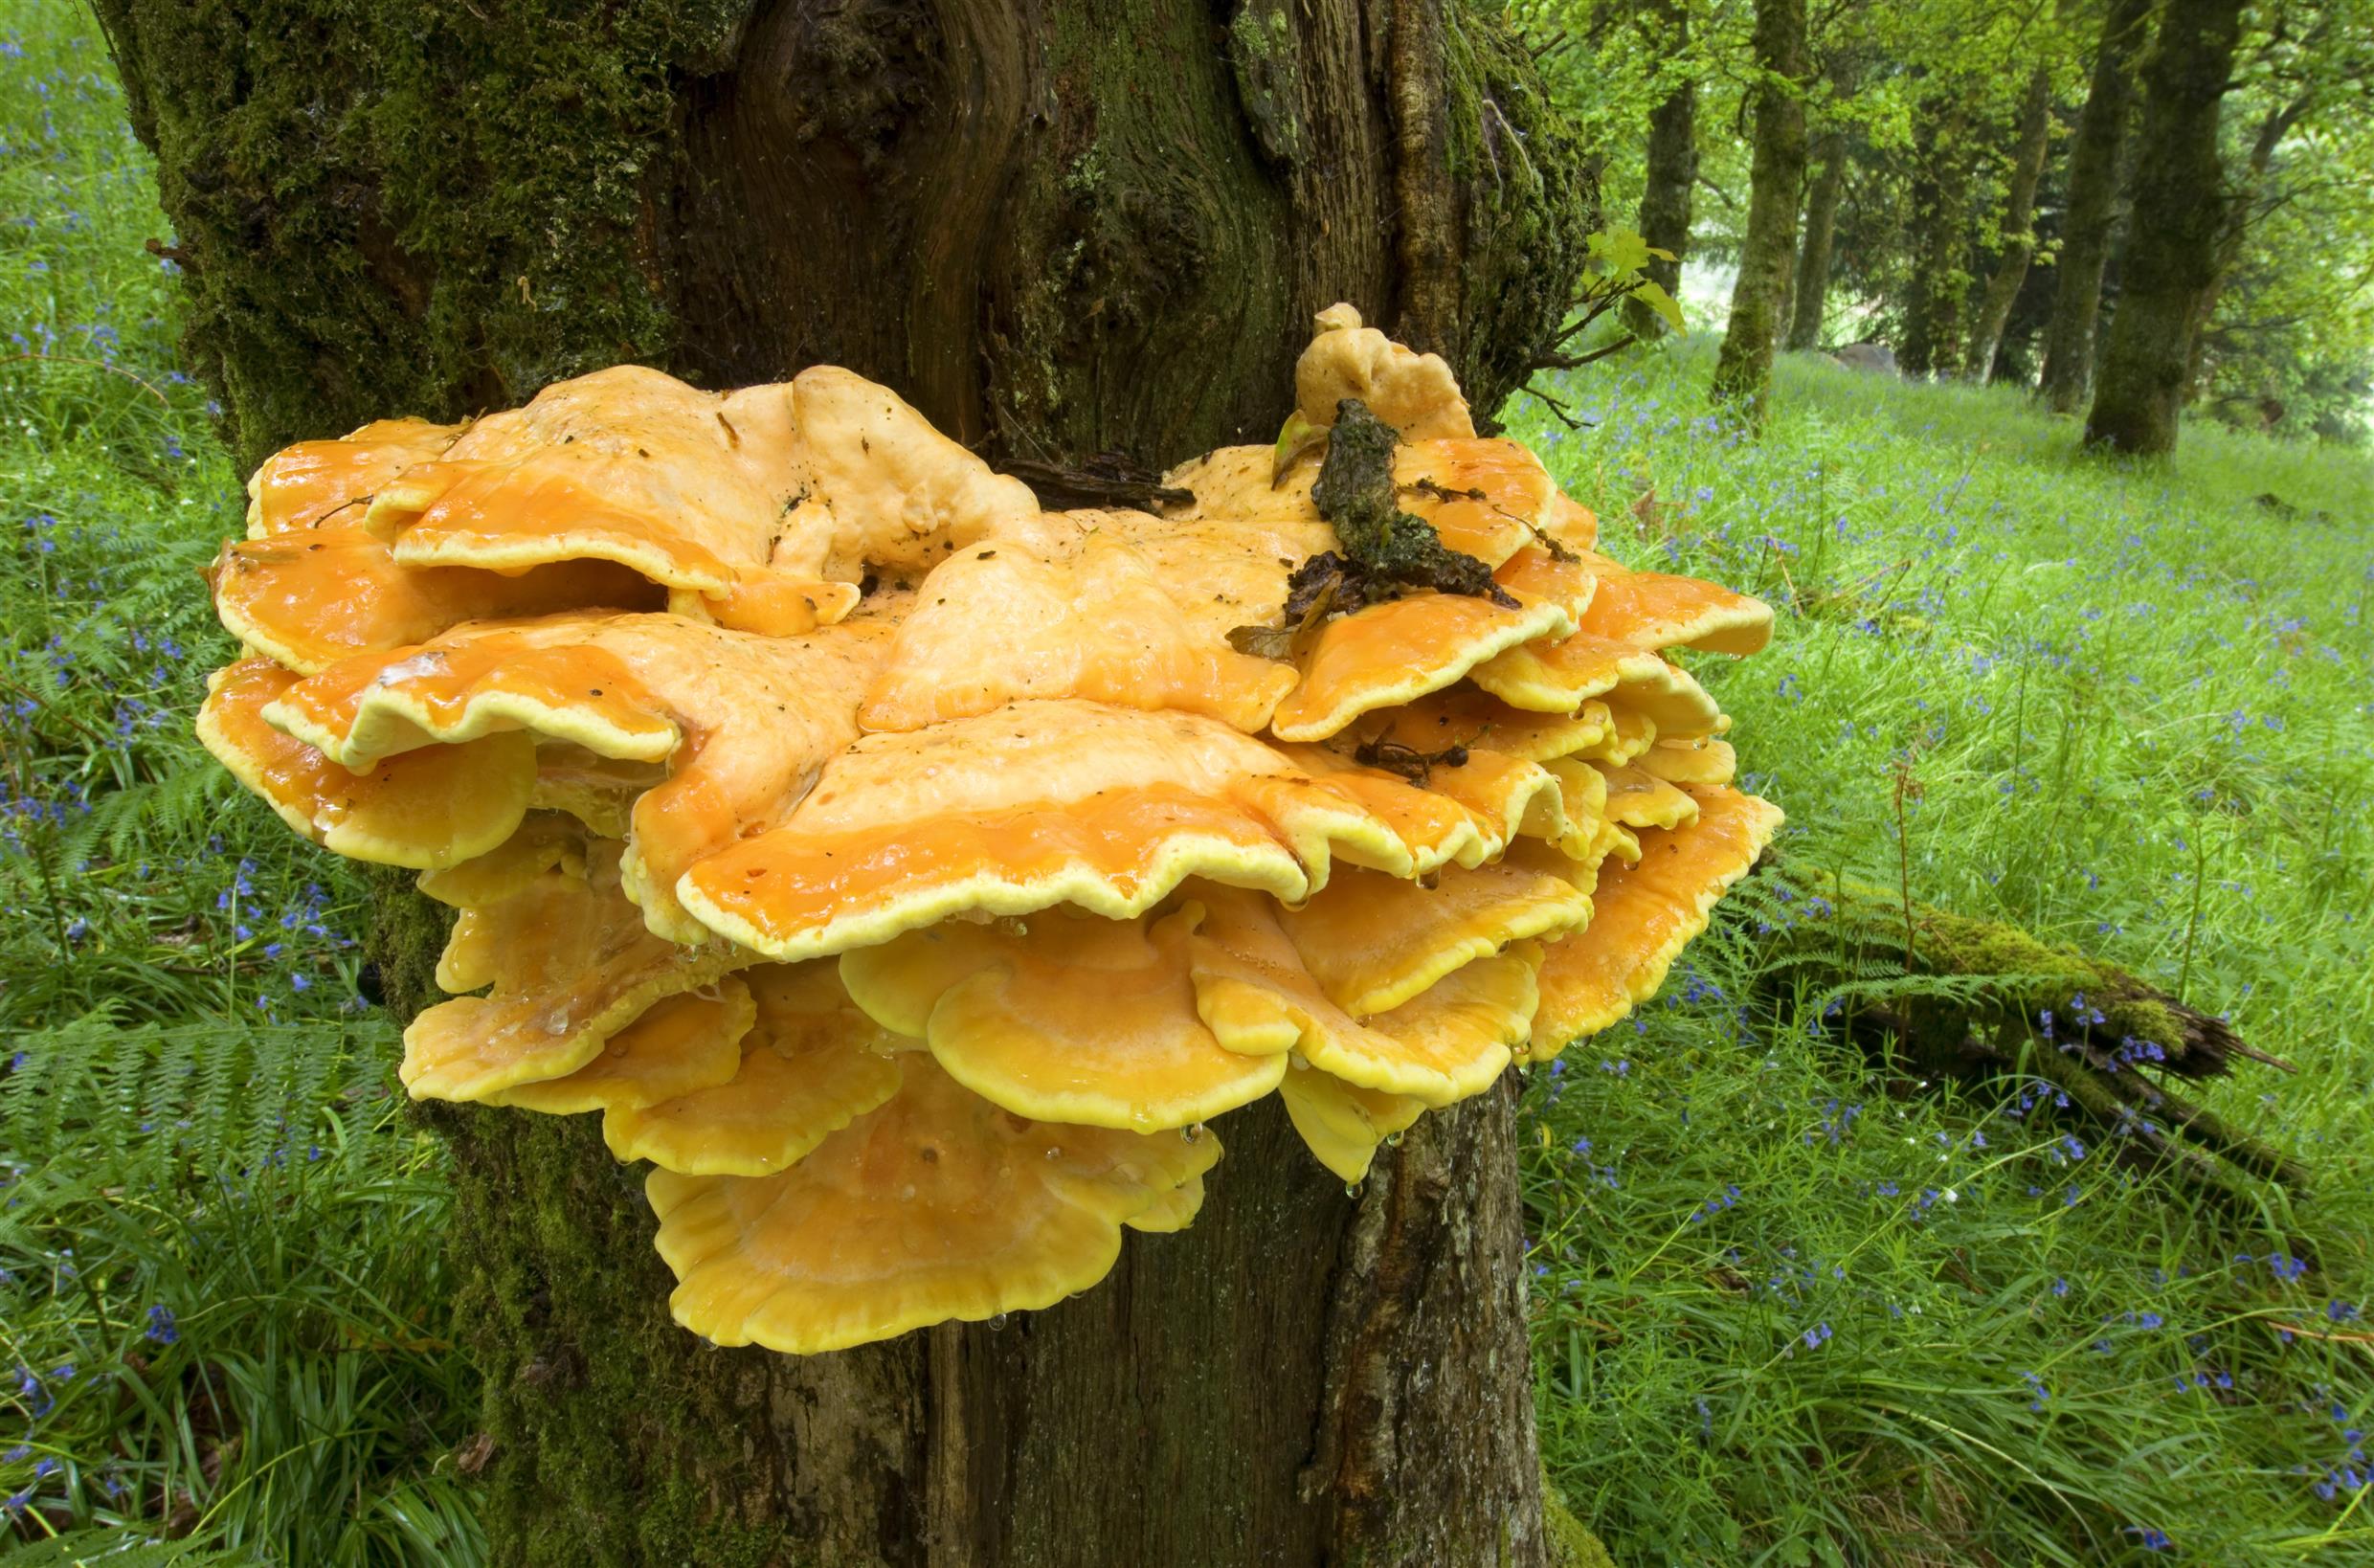 Fungi facts - Scottish Nature Notes - Our work - The RSPB Community